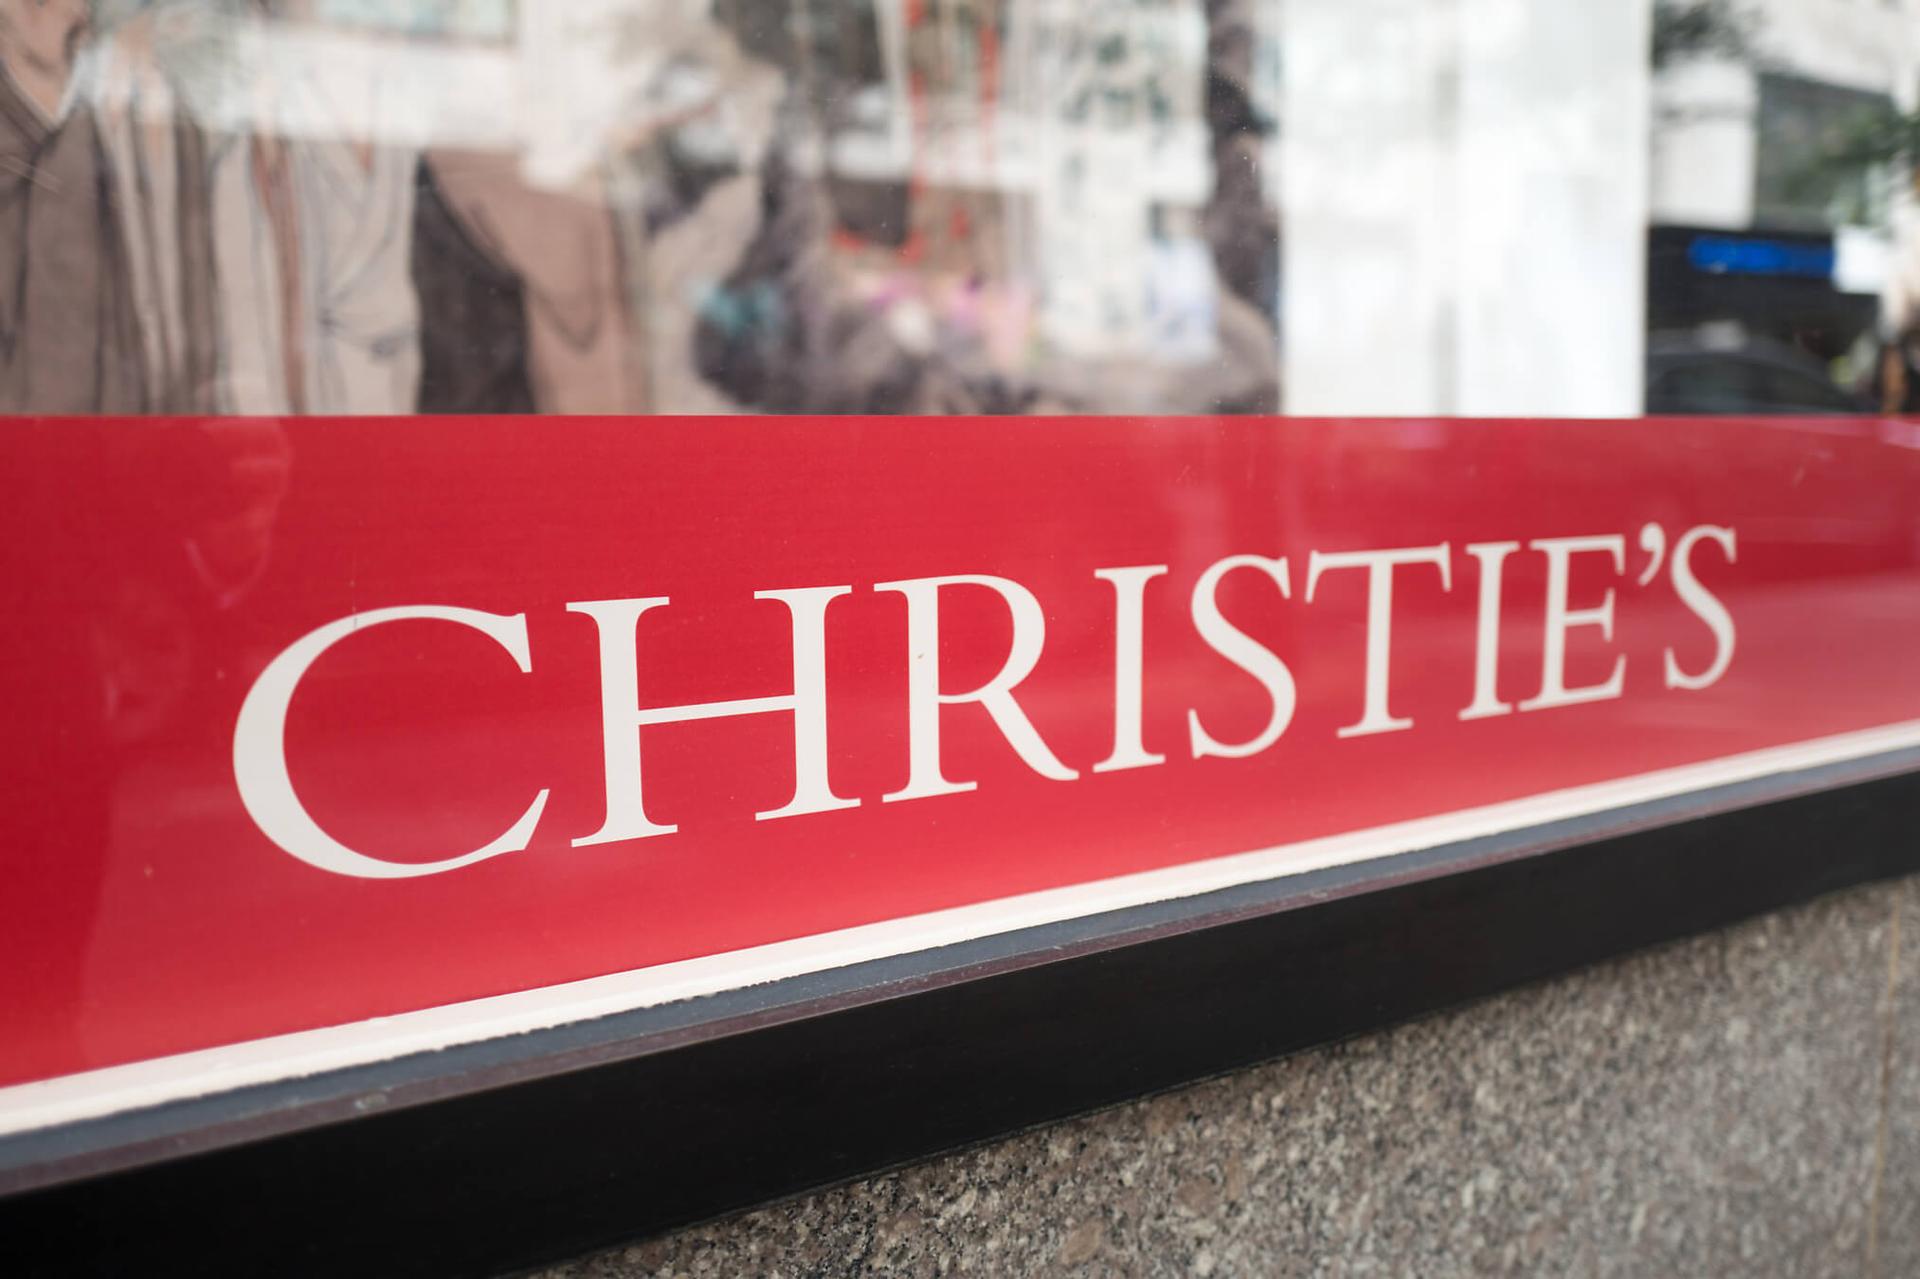 Signage for Christie’s auction house in Manhattan, Sept. 15, 2017. (Smith Collection/Gado/Getty Images)